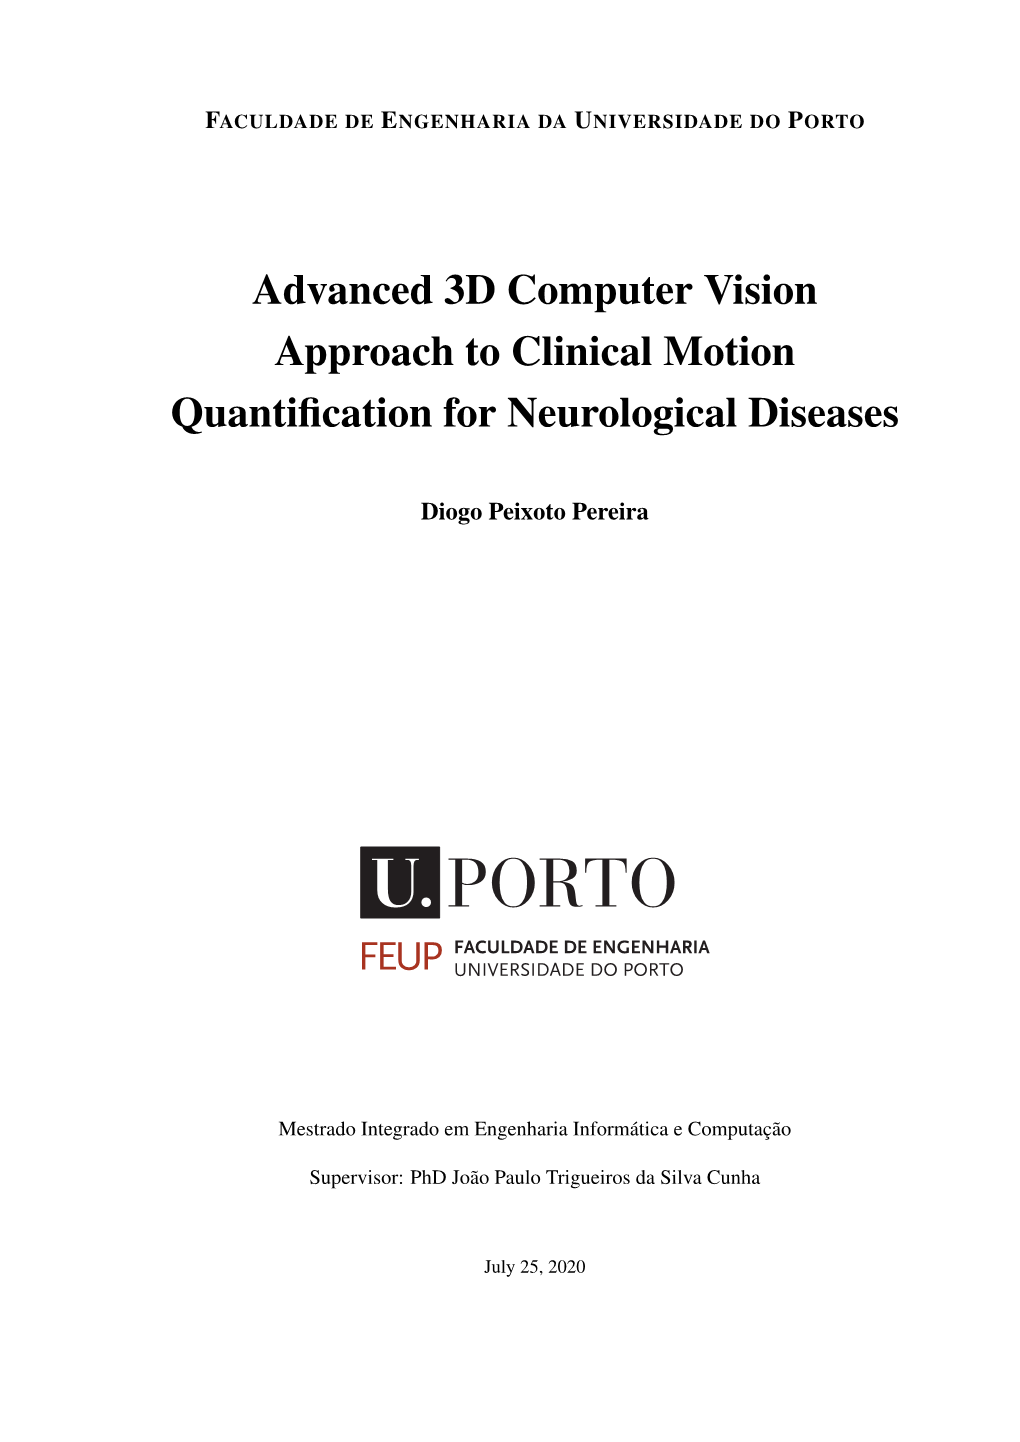 Advanced 3D Computer Vision Approach to Clinical Motion Quantiﬁcation for Neurological Diseases